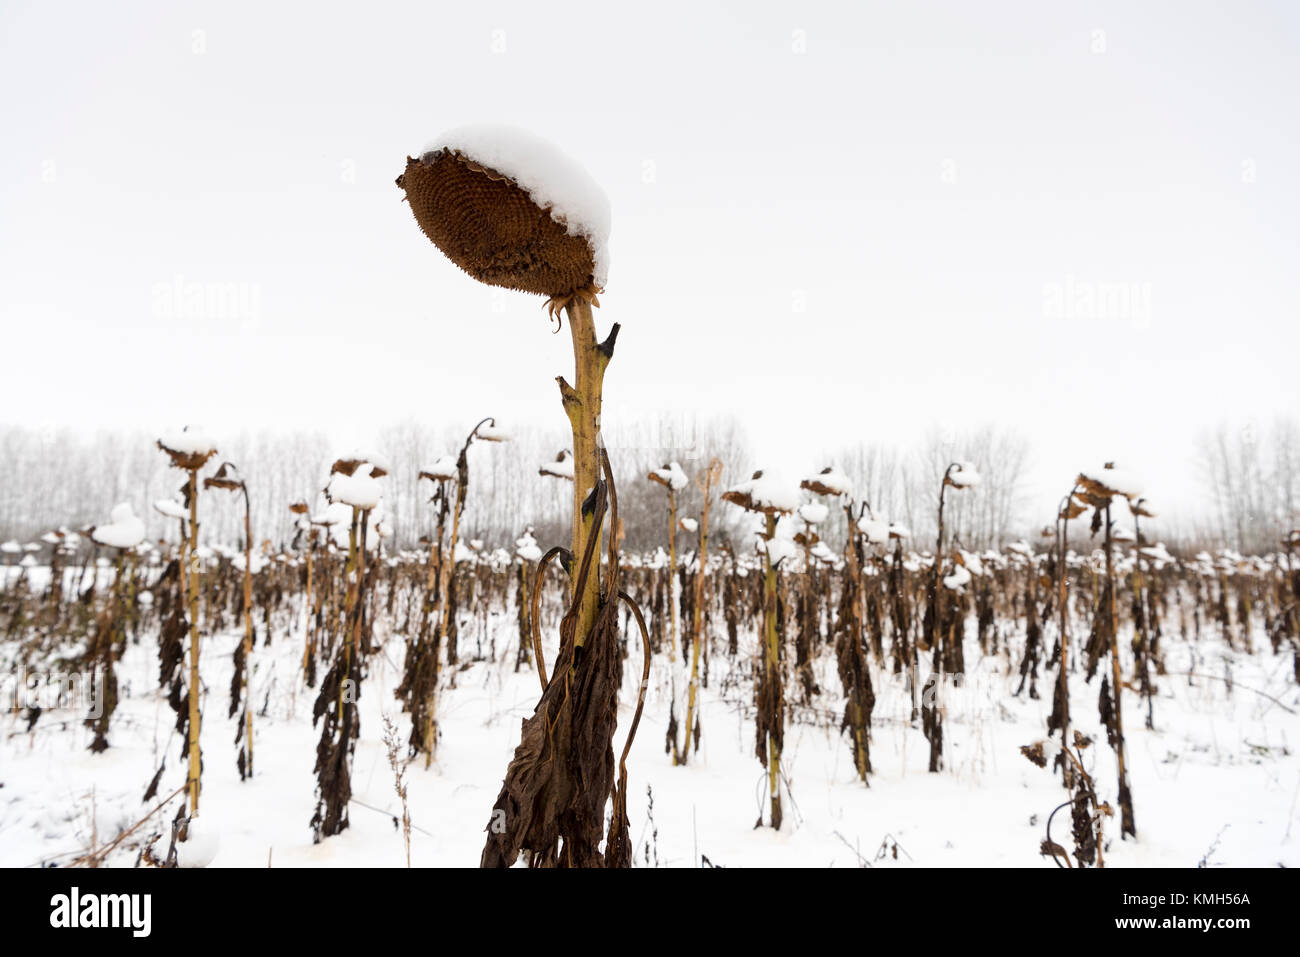 Willingham, Cambridgeshire UK 10th December 2017.  Snow covers sunflowers on a farm in the Cambridgeshire Fens creating an unusual picturesque winter scene. Temperatures fell to one degree centigrade as winter weather hit East Anglia and many other parts of the UK today. Credit Julian Eales/Alamy Live News Stock Photo